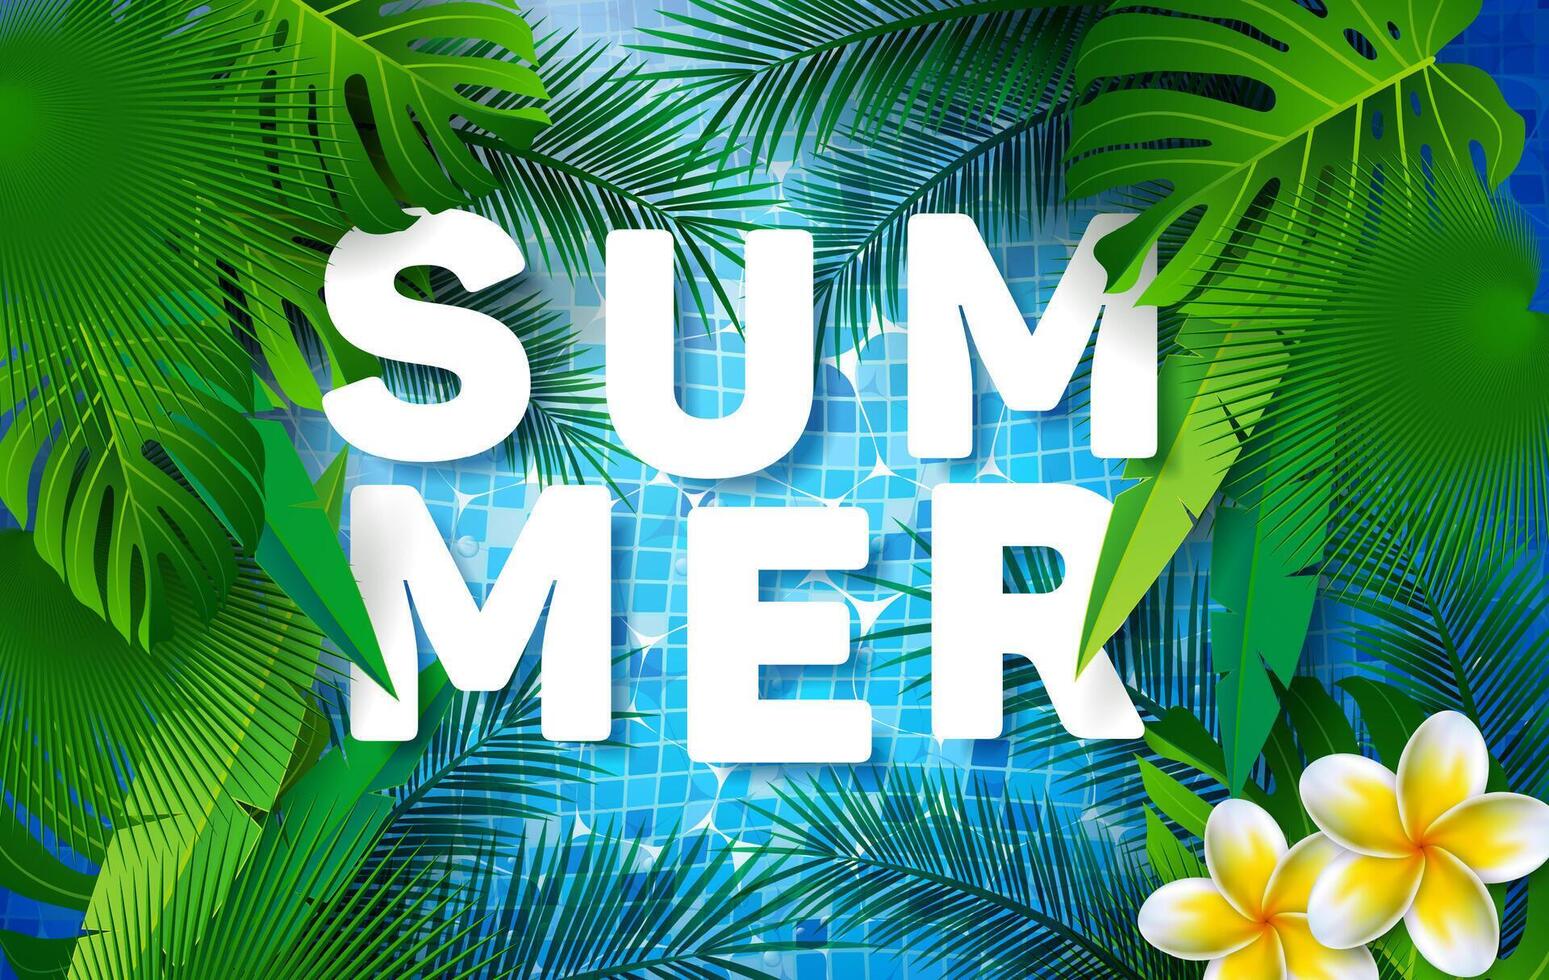 Summer Holiday Illustration with Water in the Tiled Pool Background and Flower. Summer Time Design with Tropical Plants and Palm Leaves for Banner, Flyer, Invitation, Brochure, Poster or Greeting Card vector